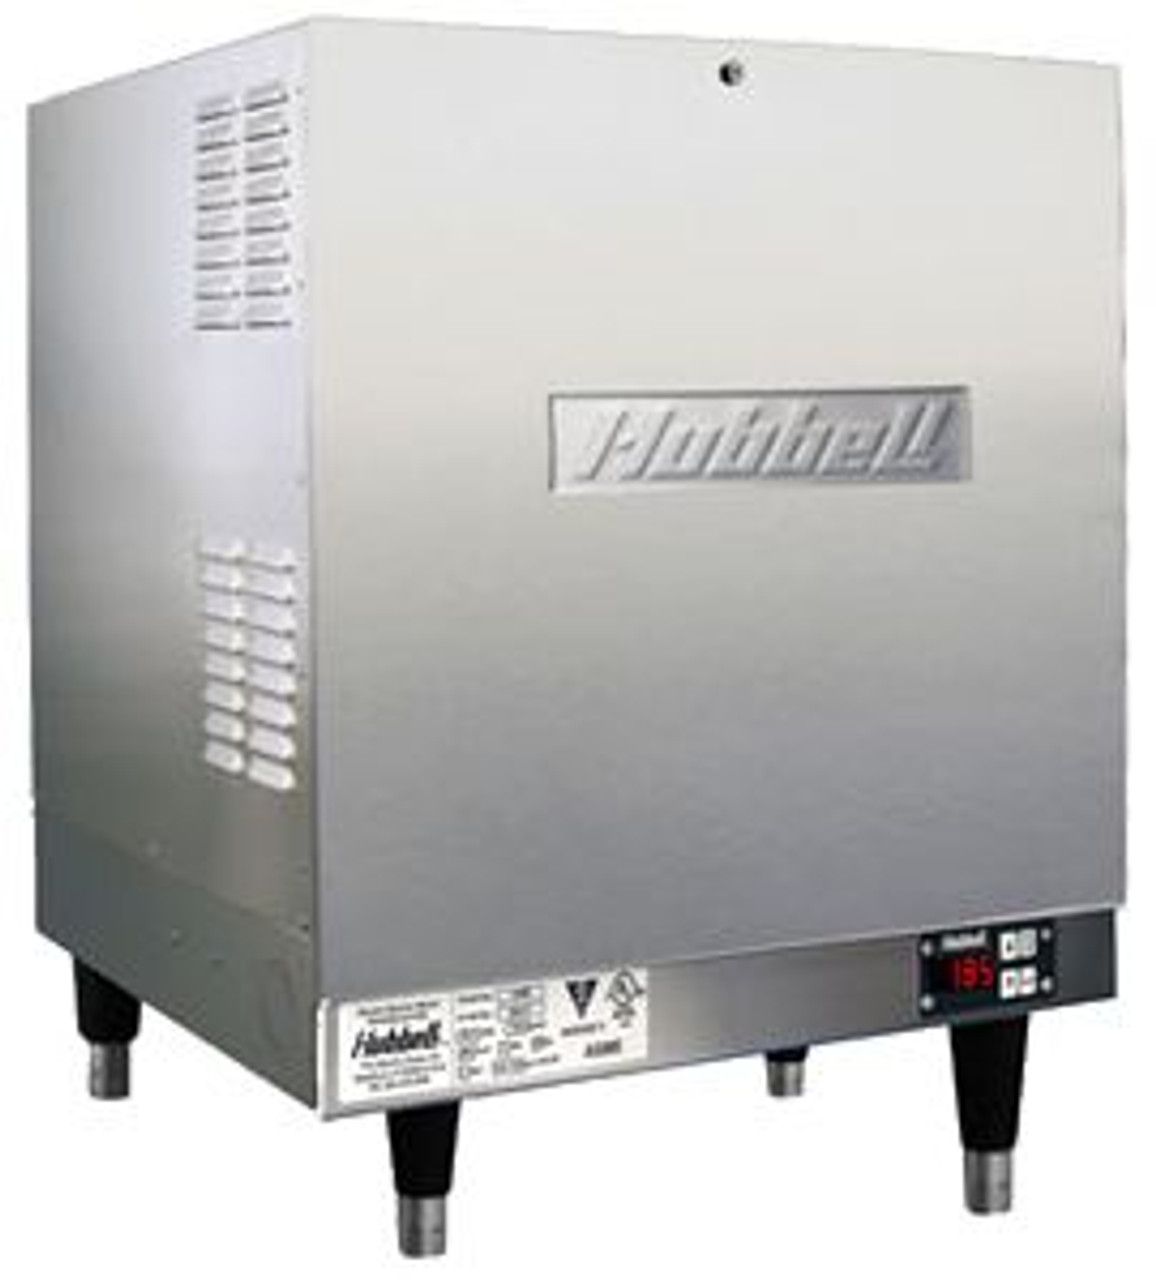 Hubbell J1613 Hot Water Booster - 13 KW